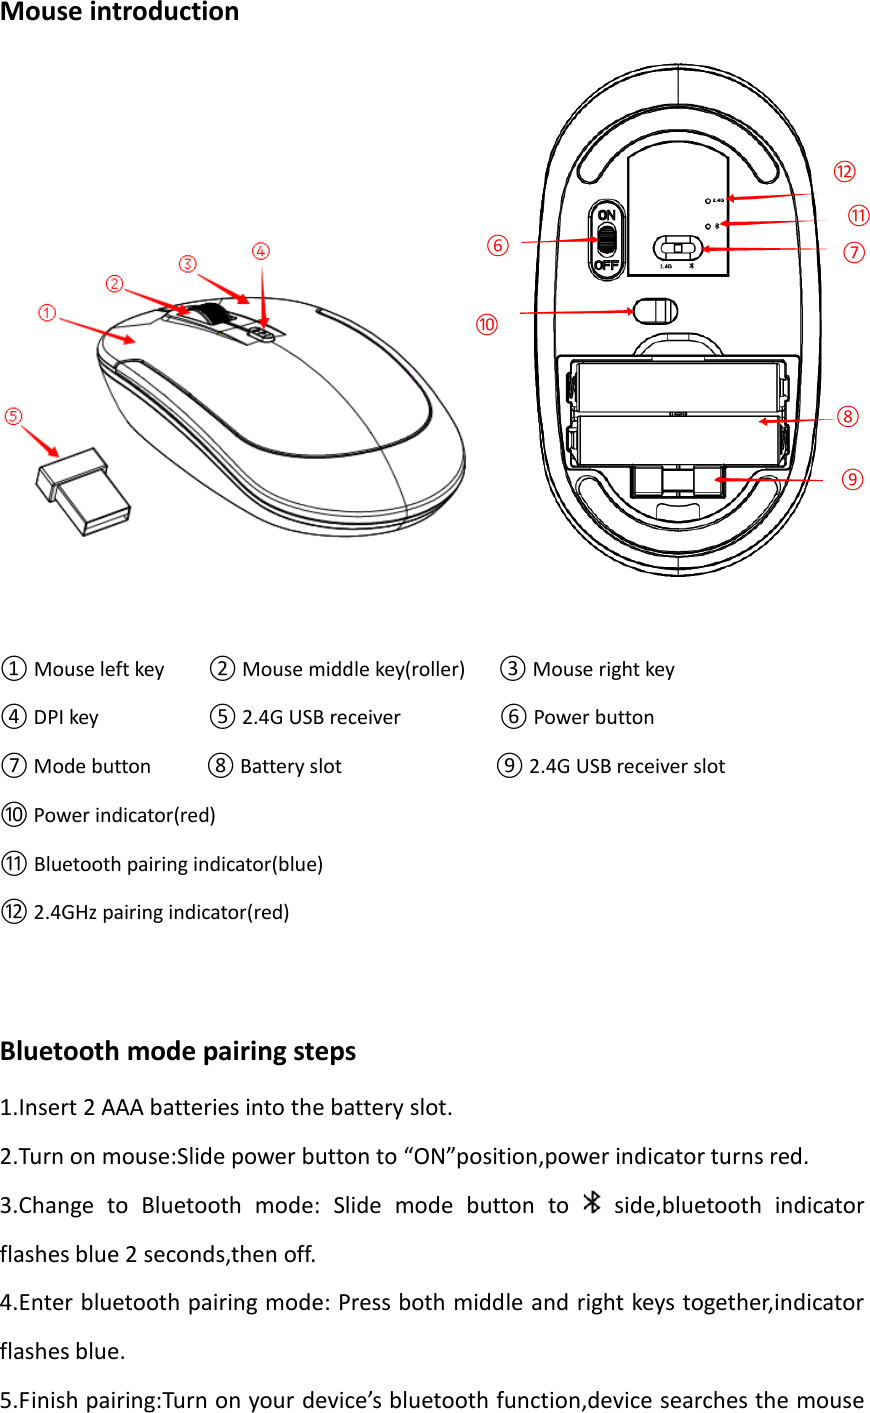 Mouse introduction   ① Mouse left key     ② Mouse middle key(roller)      ③ Mouse right key ④ DPI key          ⑤ 2.4G USB receiver                  ⑥ Power button ⑦ Mode button     ⑧ Battery slot              ⑨ 2.4G USB receiver slot ⑩ Power indicator(red)       ⑪ Bluetooth pairing indicator(blue)    ⑫ 2.4GHz pairing indicator(red)   Bluetooth mode pairing steps 1.Insert 2 AAA batteries into the battery slot. 2.Turn on mouse:Slide power button to “ON”position,power indicator turns red. 3.Change  to  Bluetooth  mode:  Slide  mode  button  to    side,bluetooth  indicator flashes blue 2 seconds,then off. 4.Enter bluetooth pairing mode: Press both middle and right keys together,indicator flashes blue. 5.Finish pairing:Turn on your device’s bluetooth function,device searches the mouse ⑥ ⑦ ⑧ ⑨ ⑩ ⑪ ⑫ 